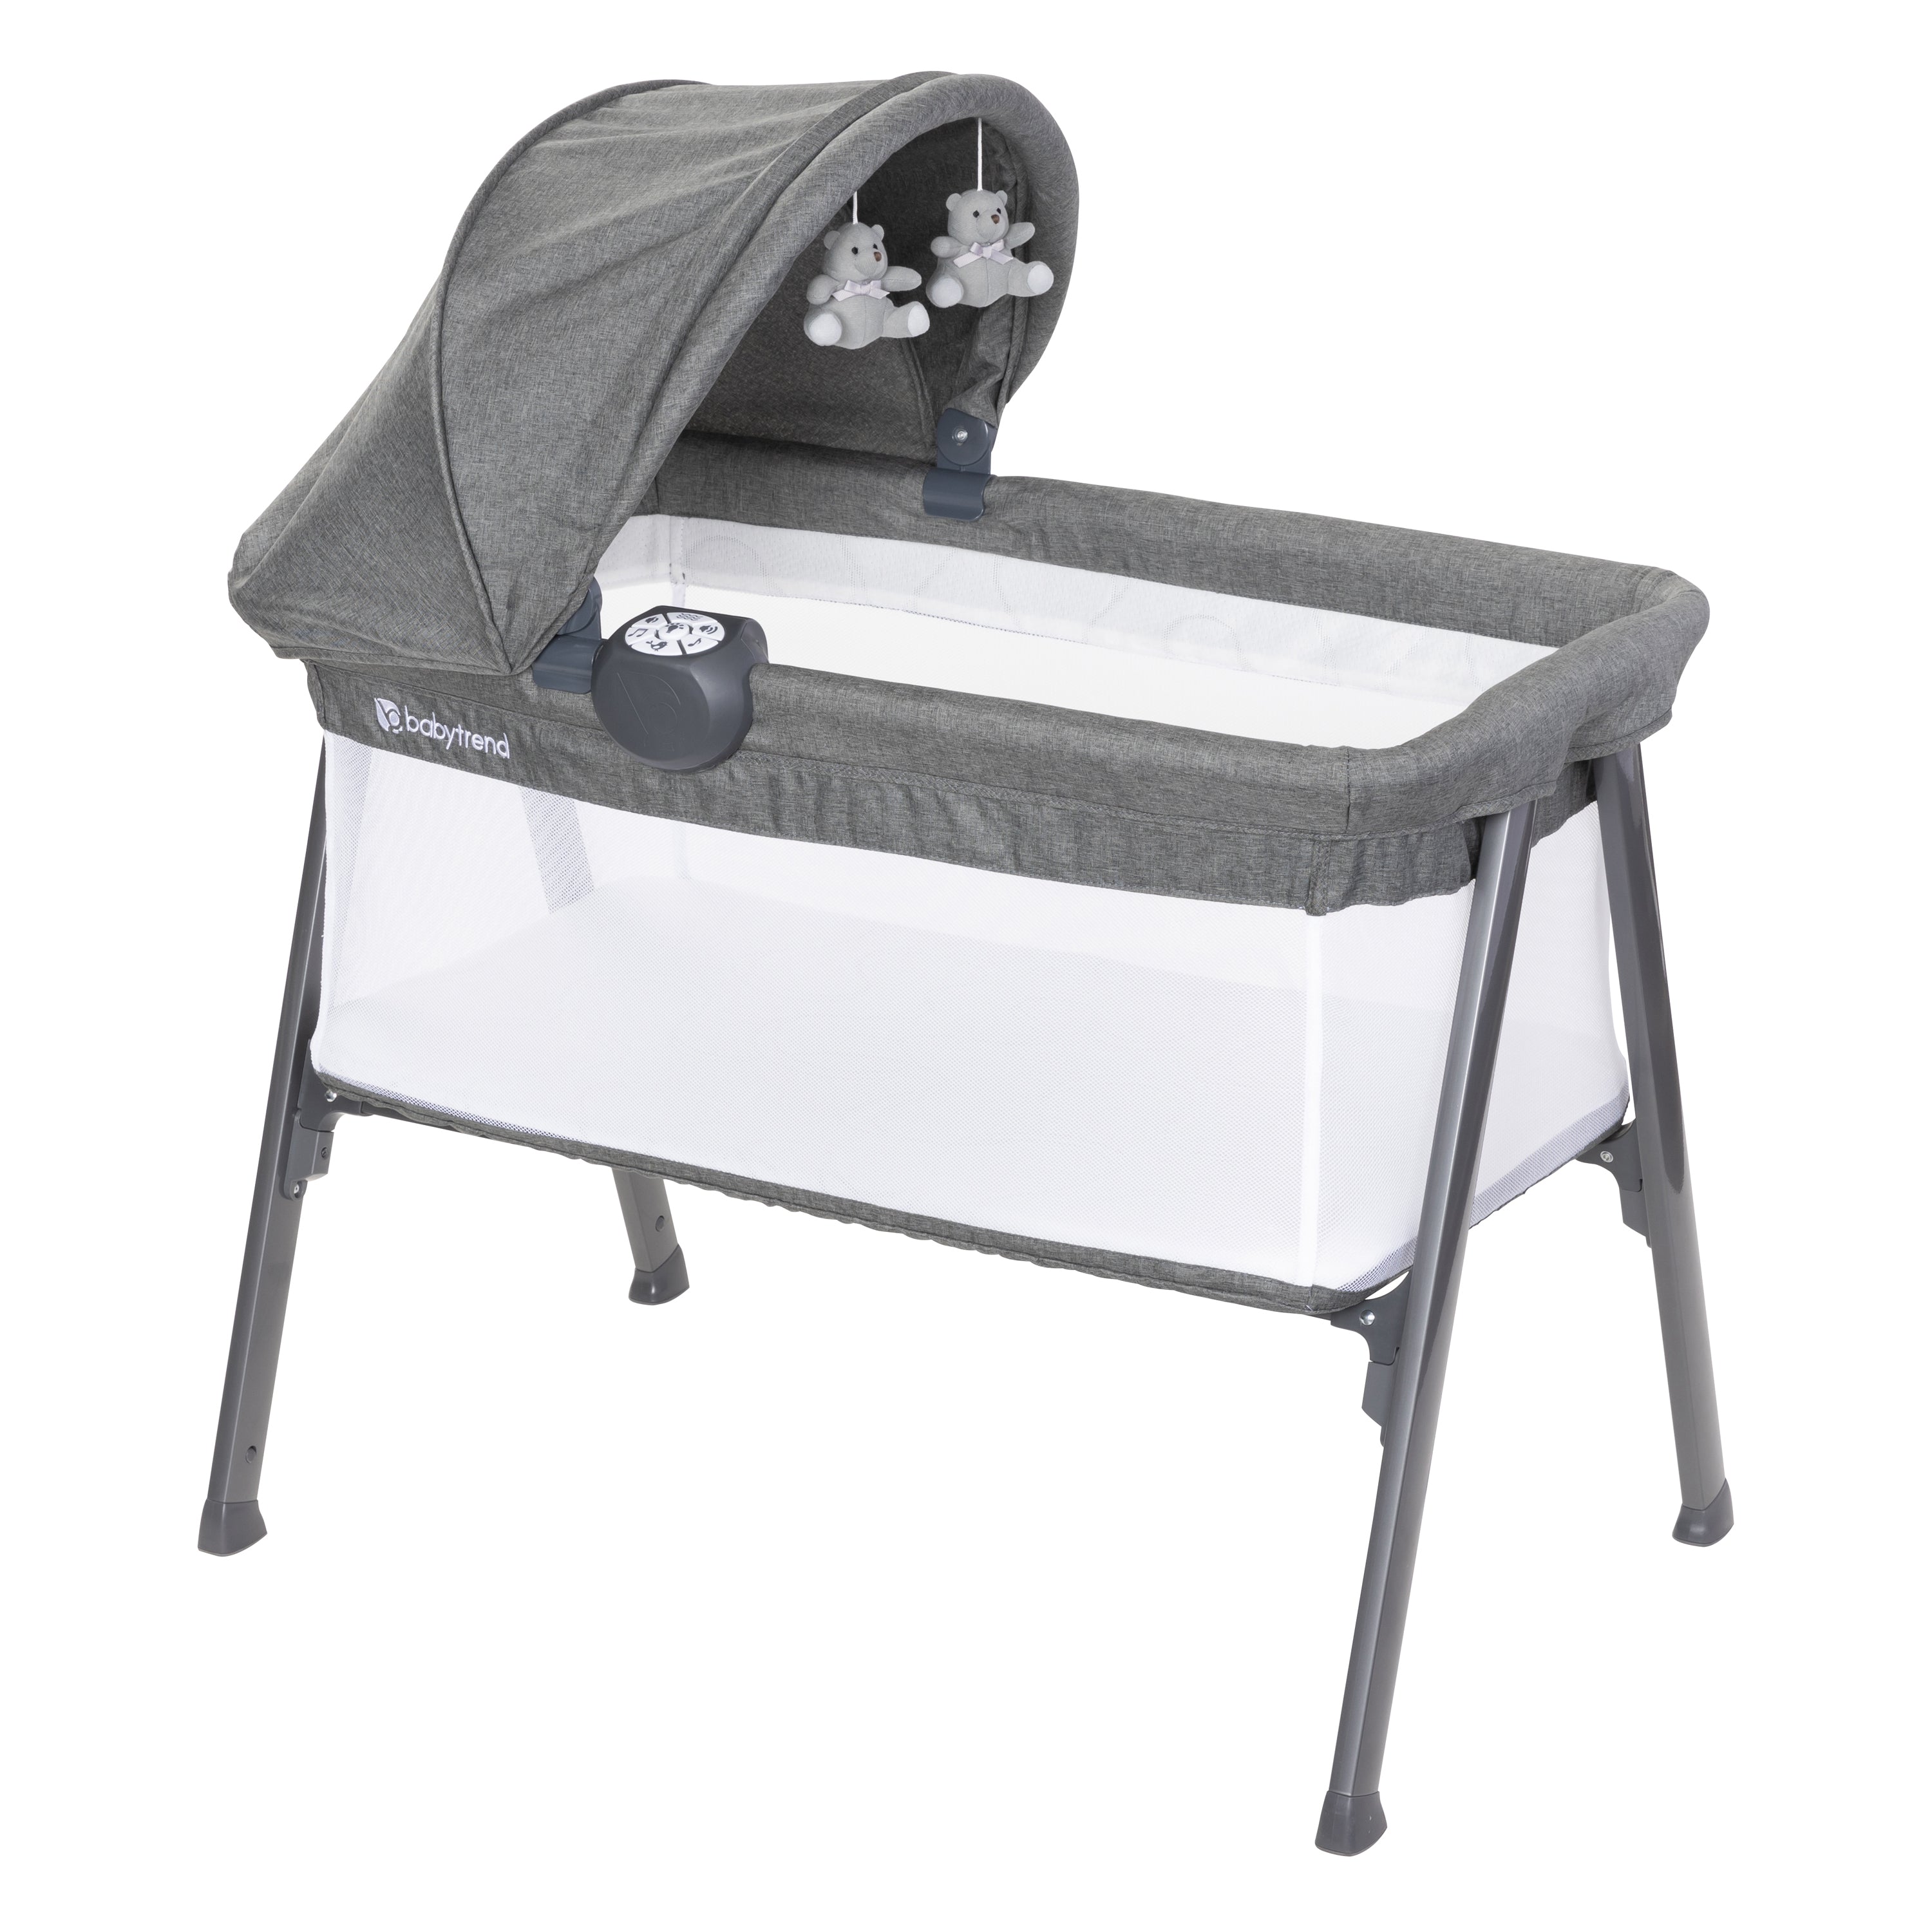 Baby Trend Lil Snooze Large Bassinet PLUS with canopy and music center